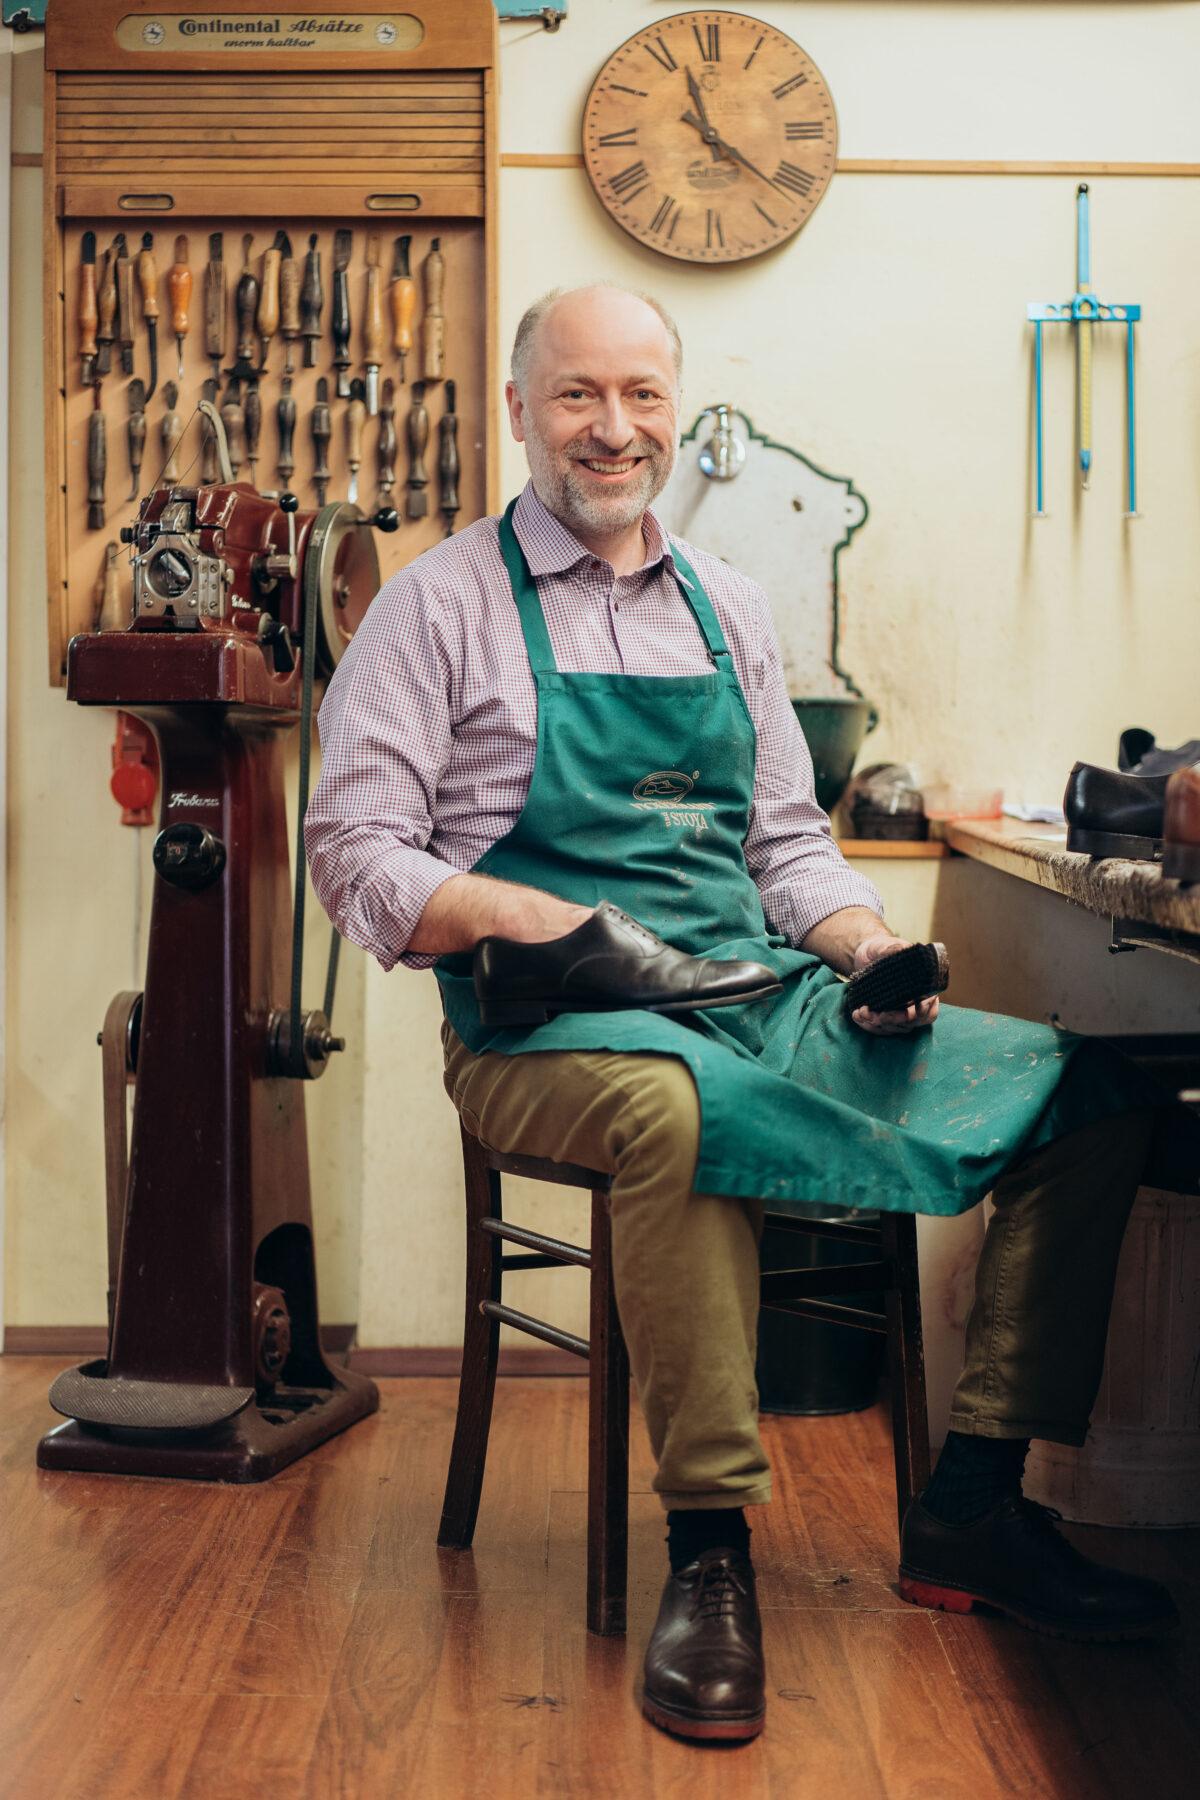 Martin Stoya, a trained orthopedic shoemaker, can always be found with an apron on in the Vickermann and Stoya shop, repairing a pair of shoes or handmaking a new one.<br/>(Courtesy of Vickermann und Stoya)